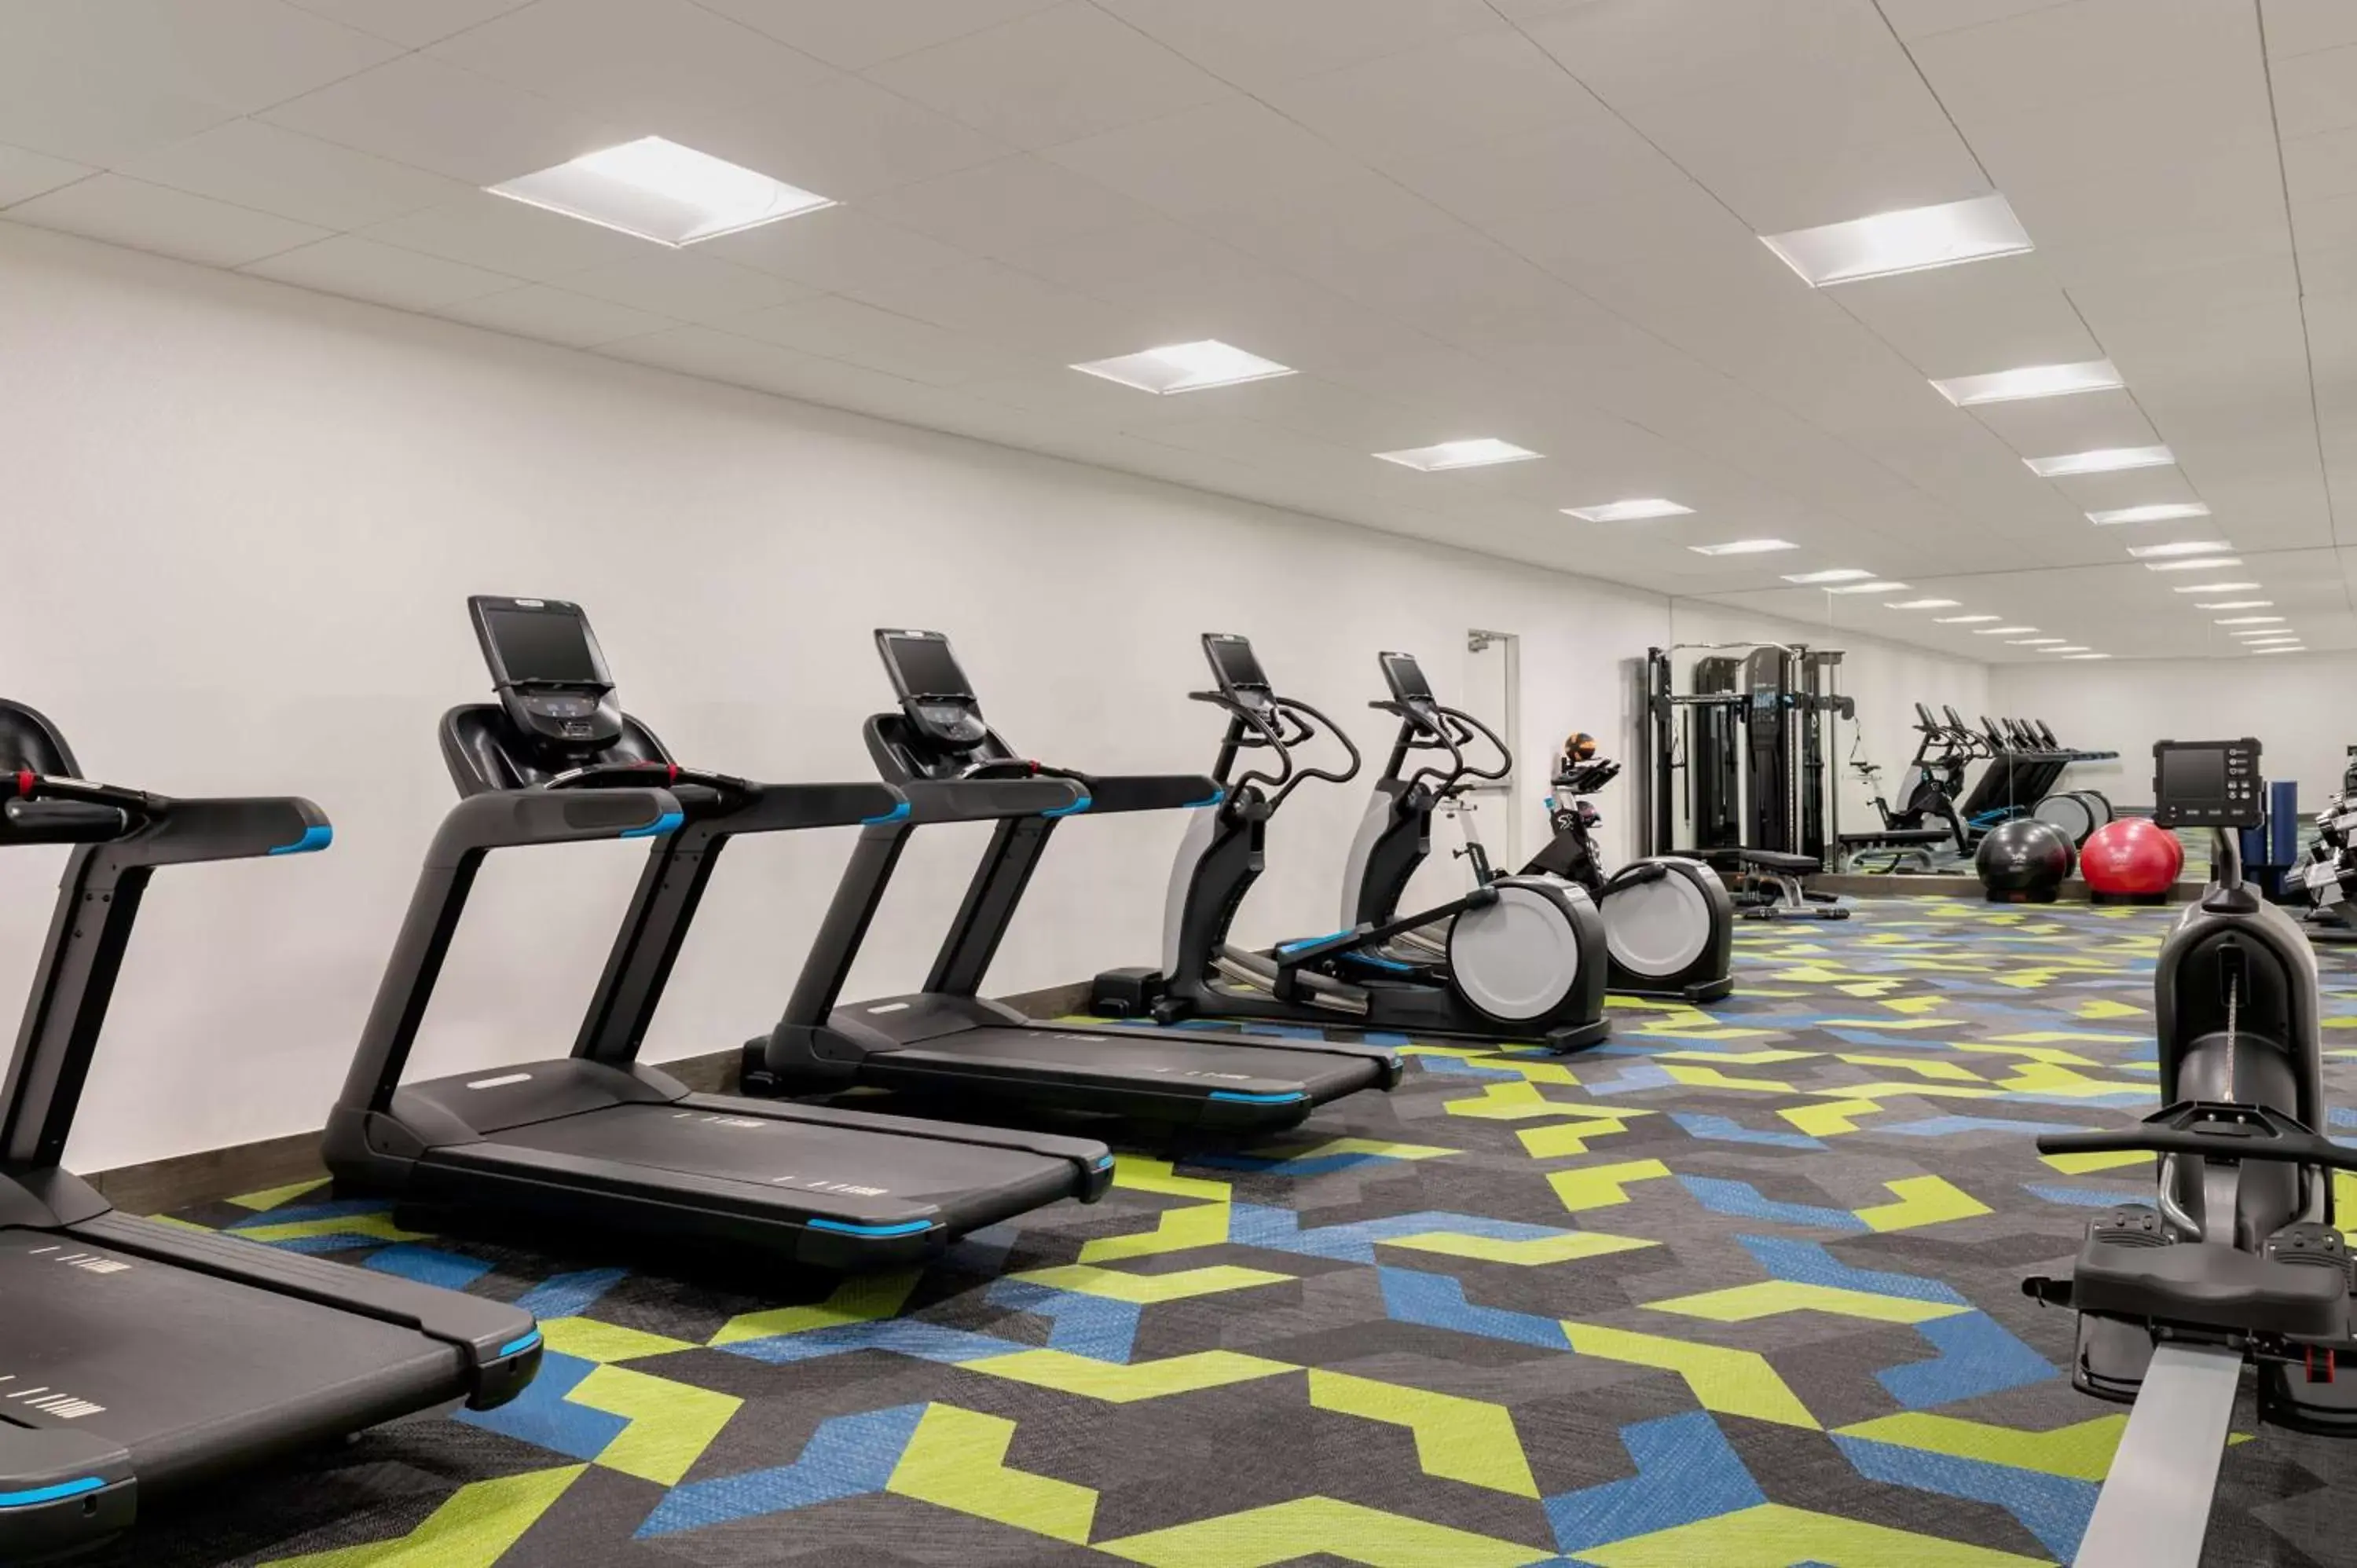 Fitness centre/facilities, Fitness Center/Facilities in DoubleTree by Hilton San Francisco South Airport Blvd